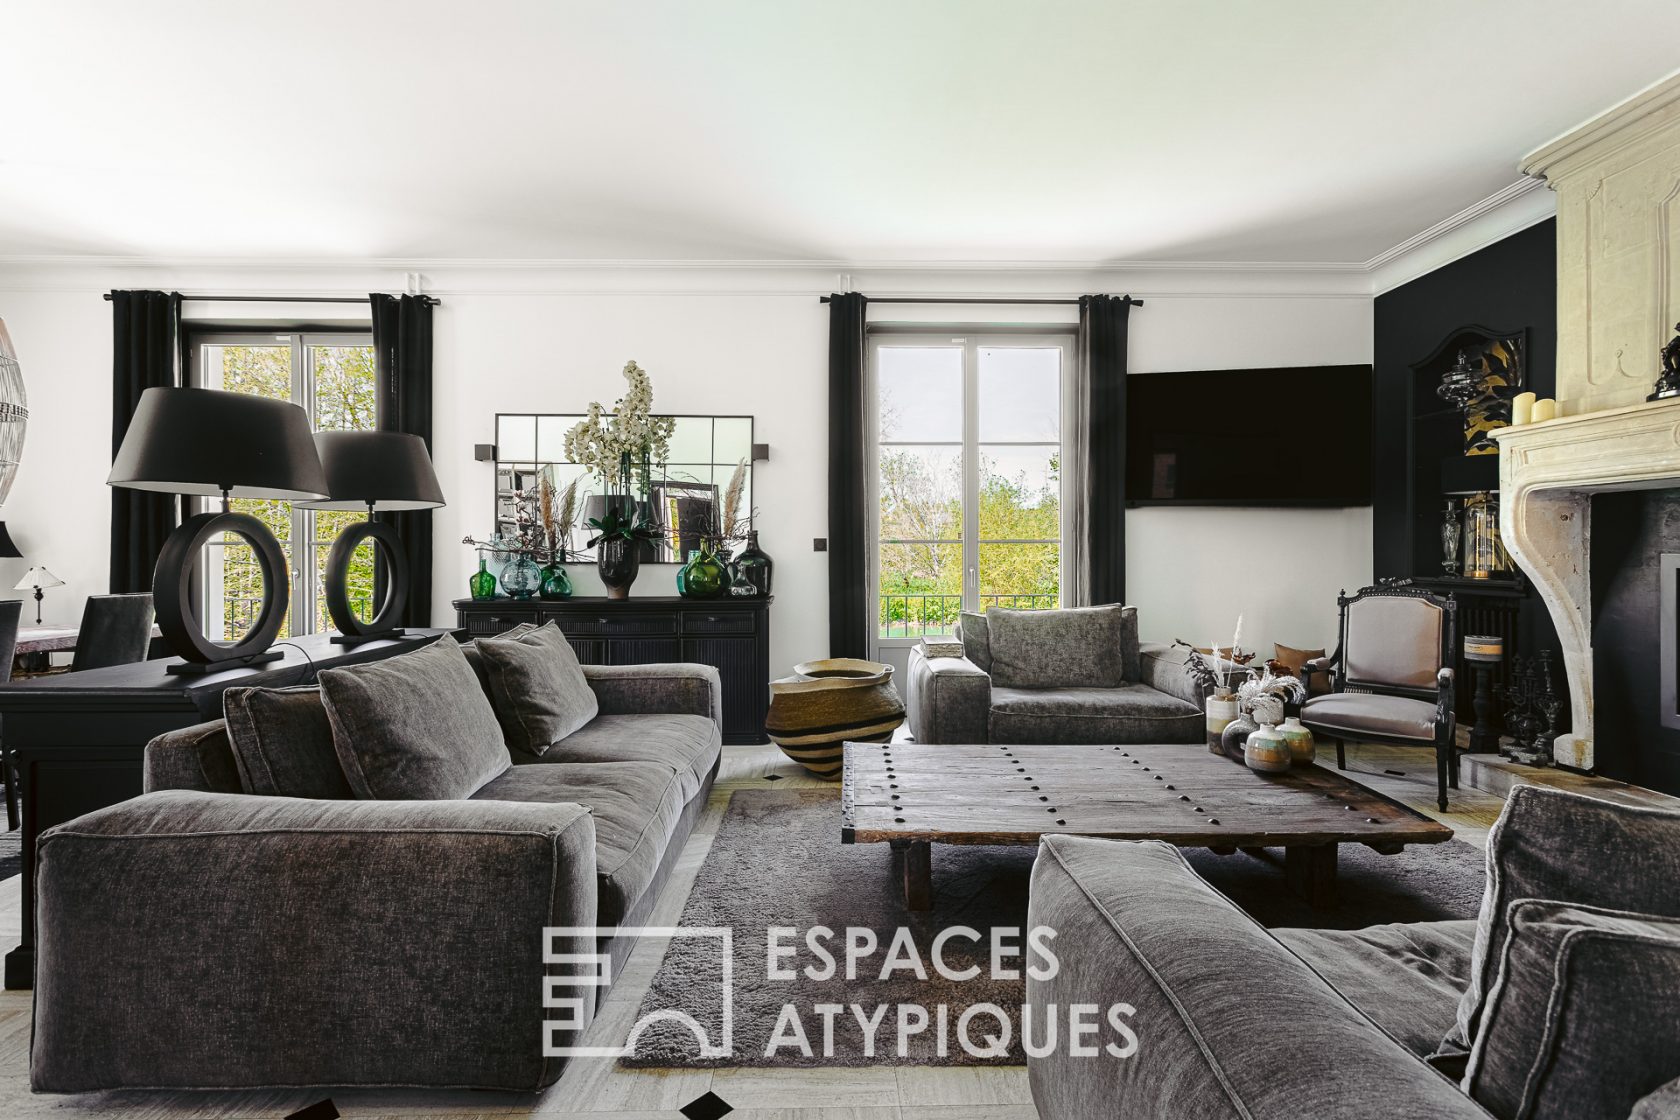 Magnificent residence and its island of greenery on the banks of the Sèvre